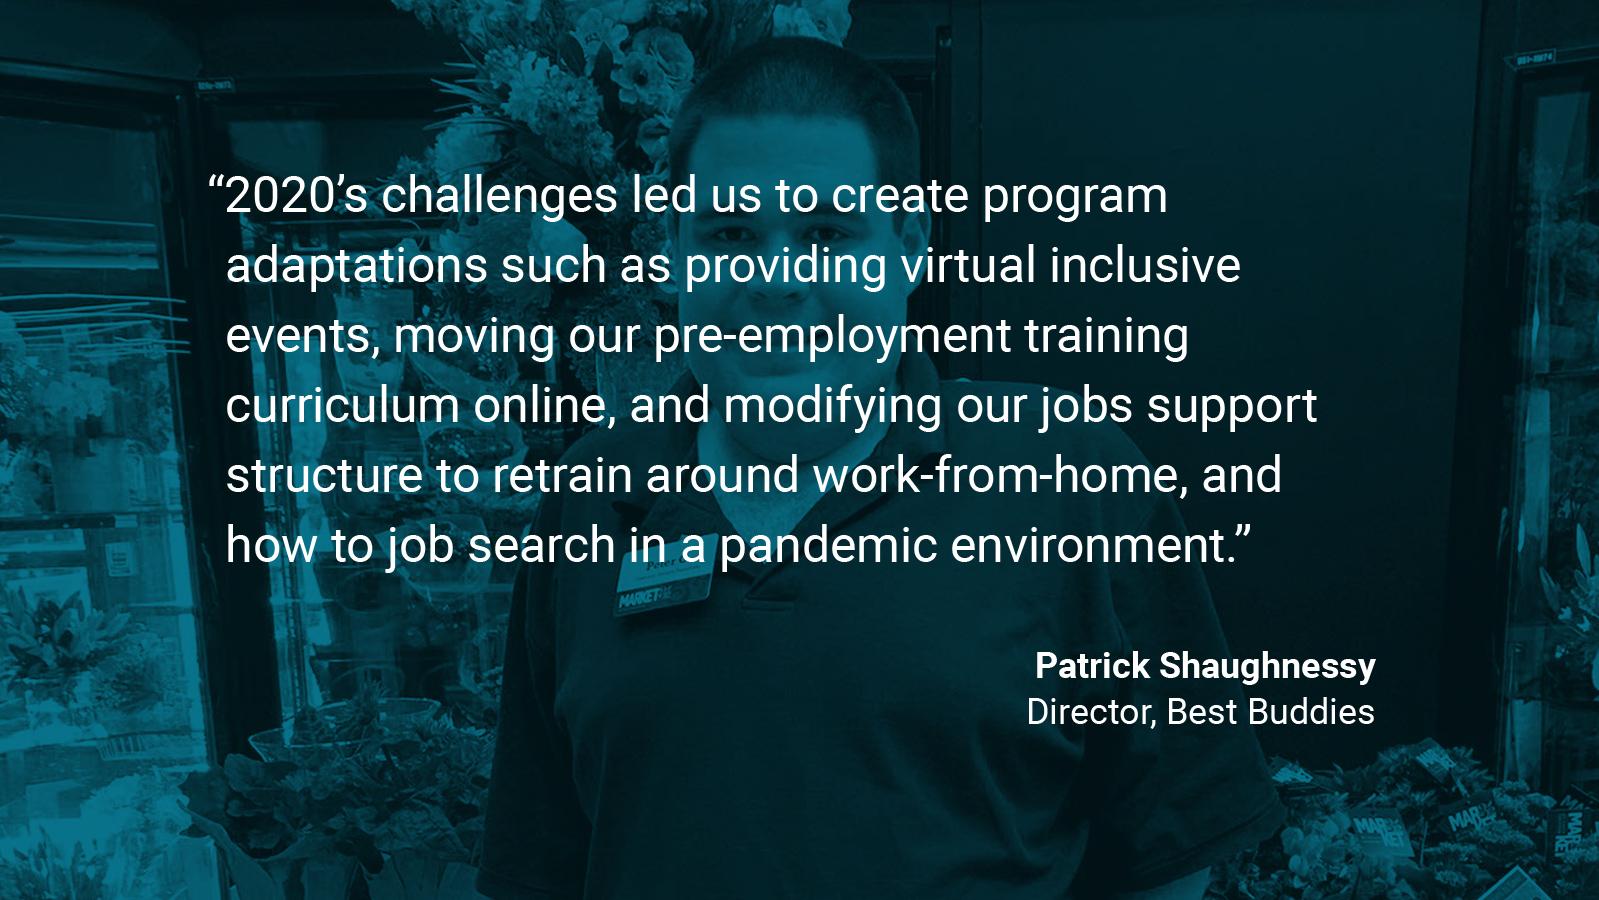 (slide 4 of 4) Quote by: Patrick Shaughnessy, Director at Best Buddies: "2020’s challenges led us to create program adaptations such as providing virtual inclusive events, moving our pre-employment training curriculum online, and modifying our jobs support structure to retrain around work-from-home, and how to job search in a pandemic environment.  Peter, pictured here, utilized these new supports and was successfully hired during the pandemic as a front-end associate at his local grocery store.. 